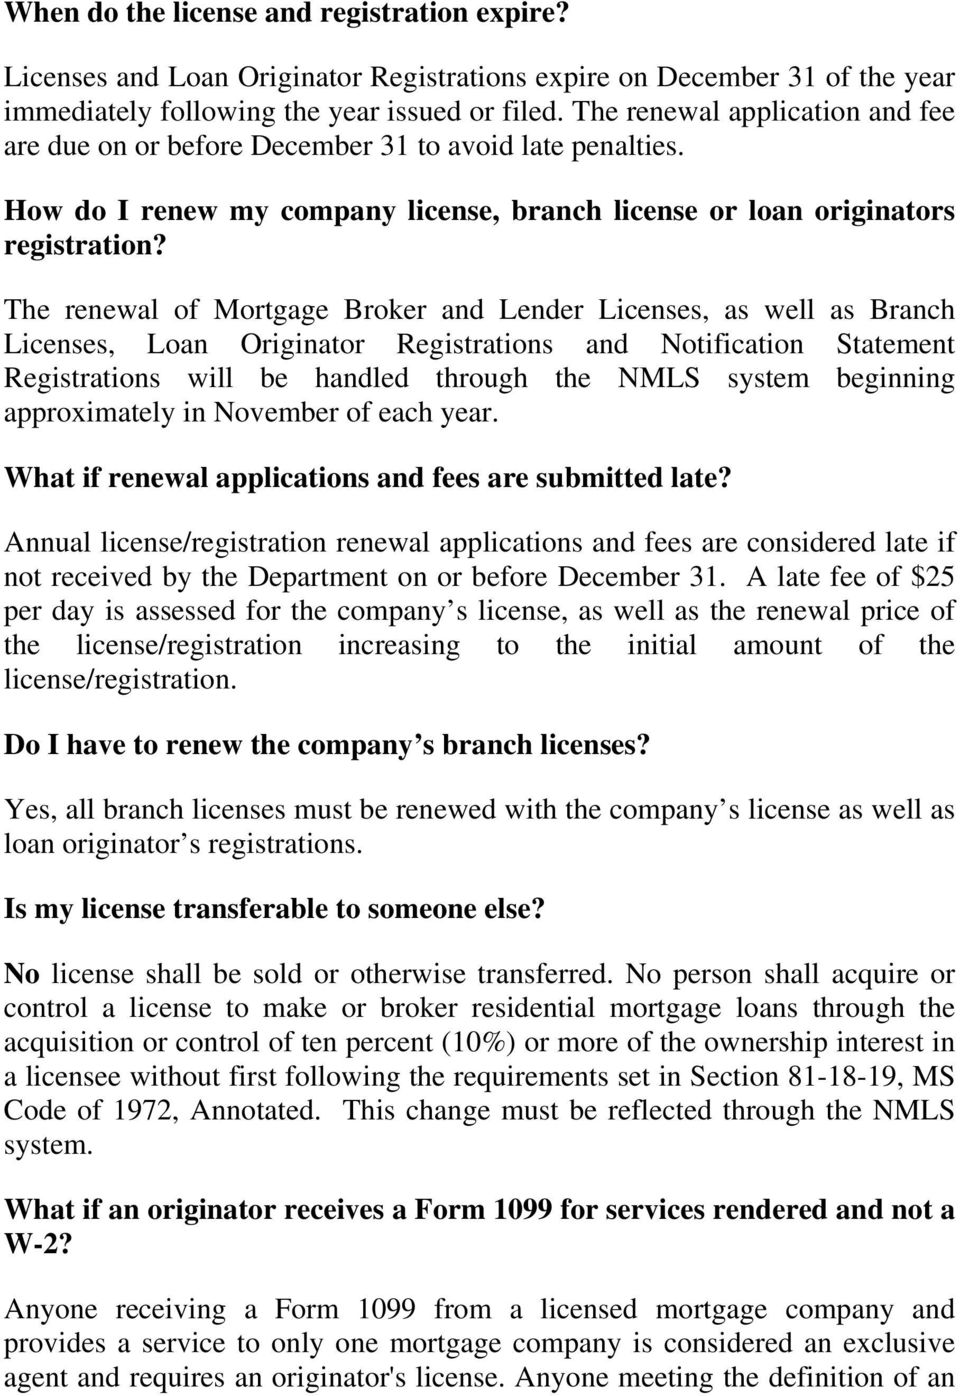 The renewal of Mortgage Broker and Lender Licenses, as well as Branch Licenses, Loan Originator Registrations and Notification Statement Registrations will be handled through the NMLS system